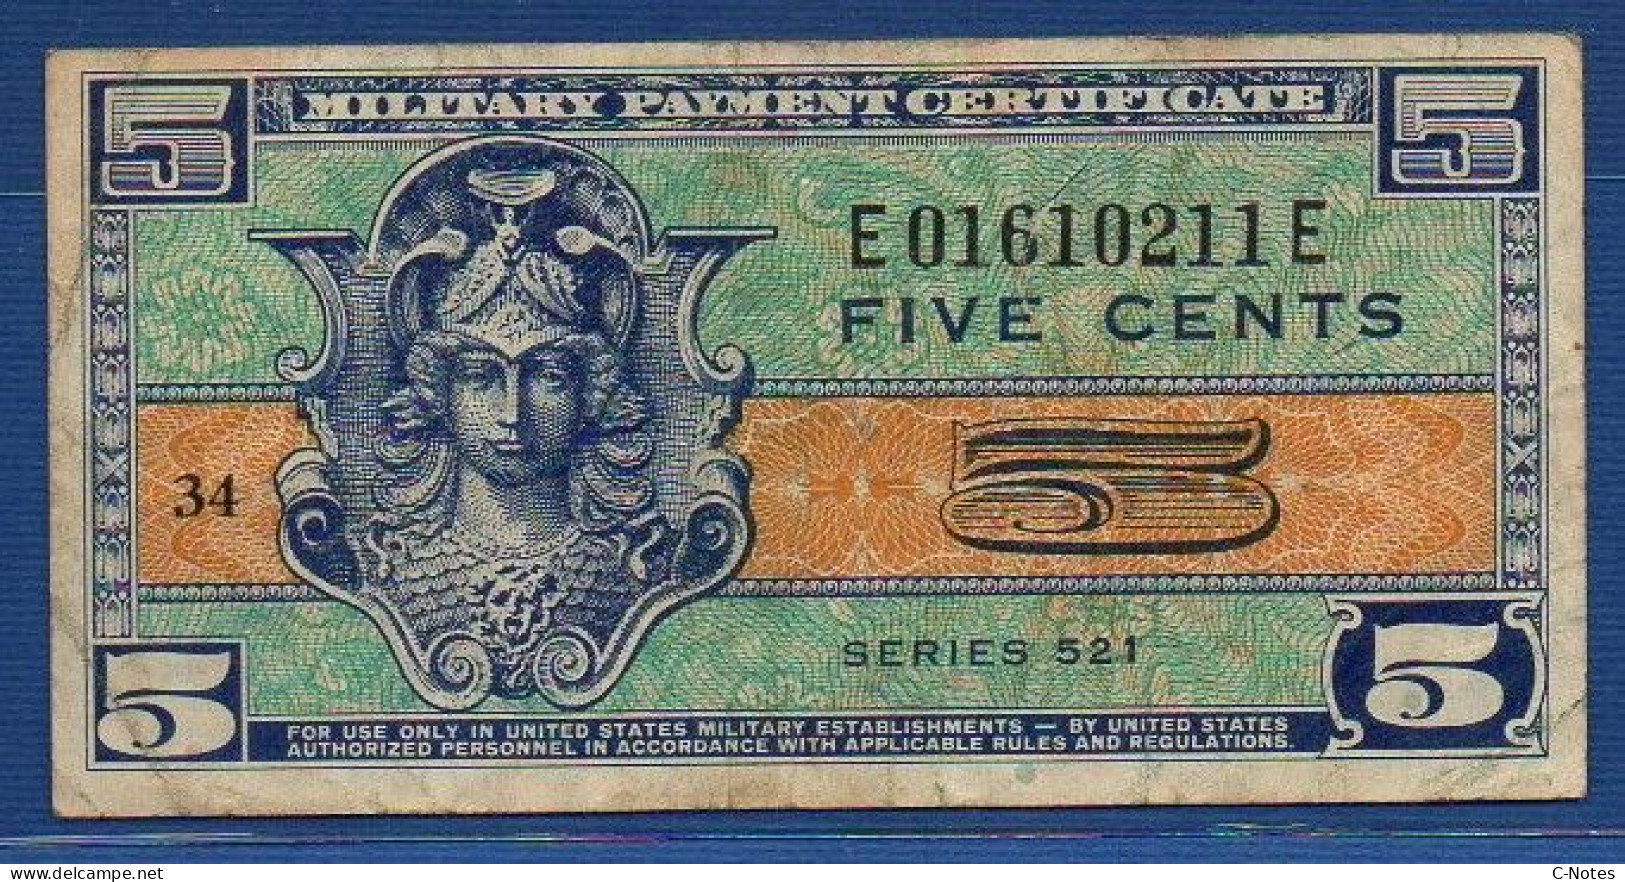 UNITED STATES OF AMERICA - P.M29 – 5 Cents 1954 Circulated, S/n E01610211E - 1954-1958 - Serie 521